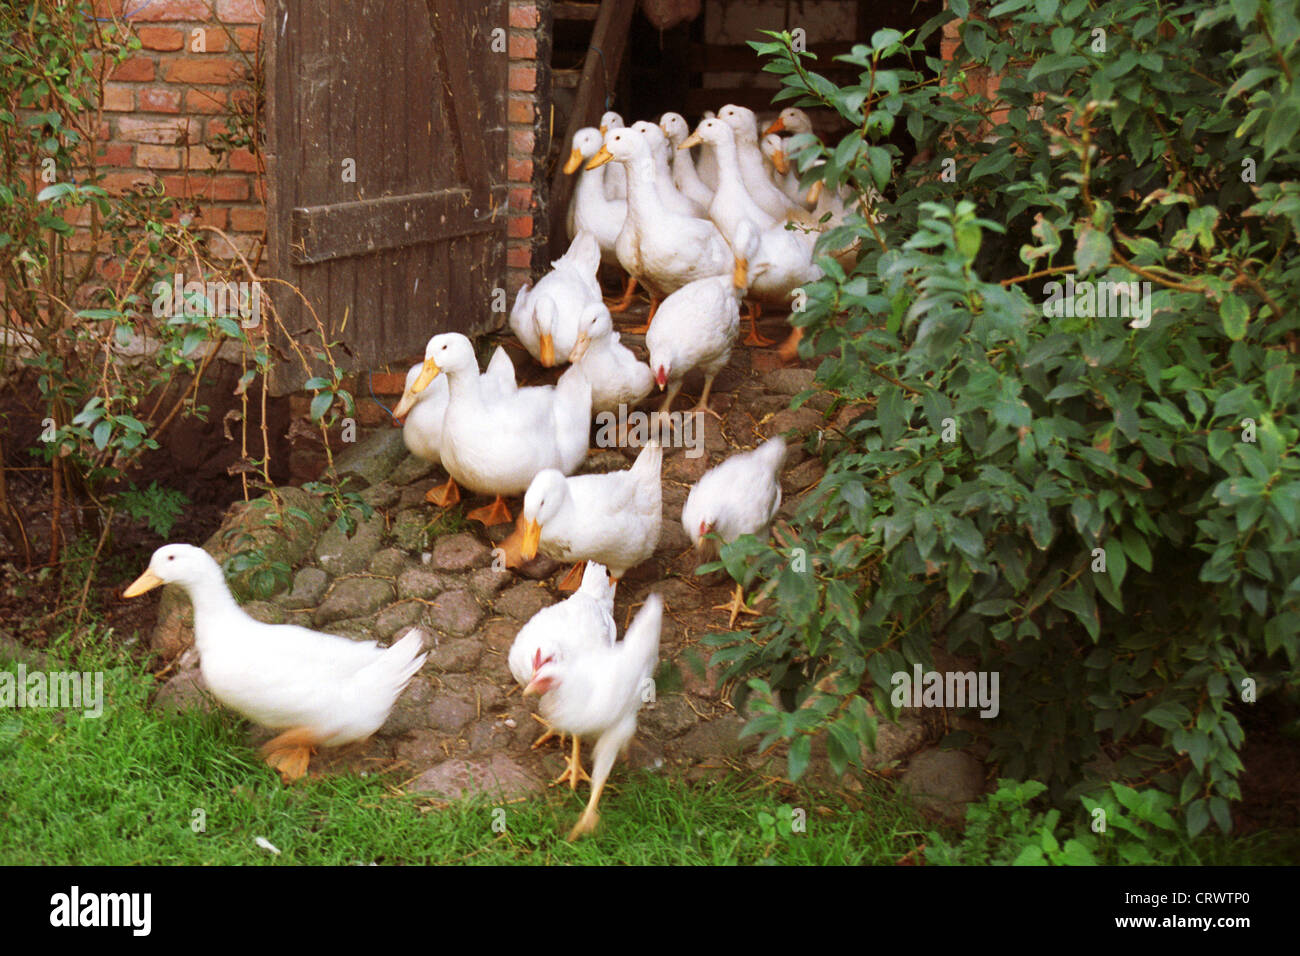 Ducks and chickens leave their stall Stock Photo